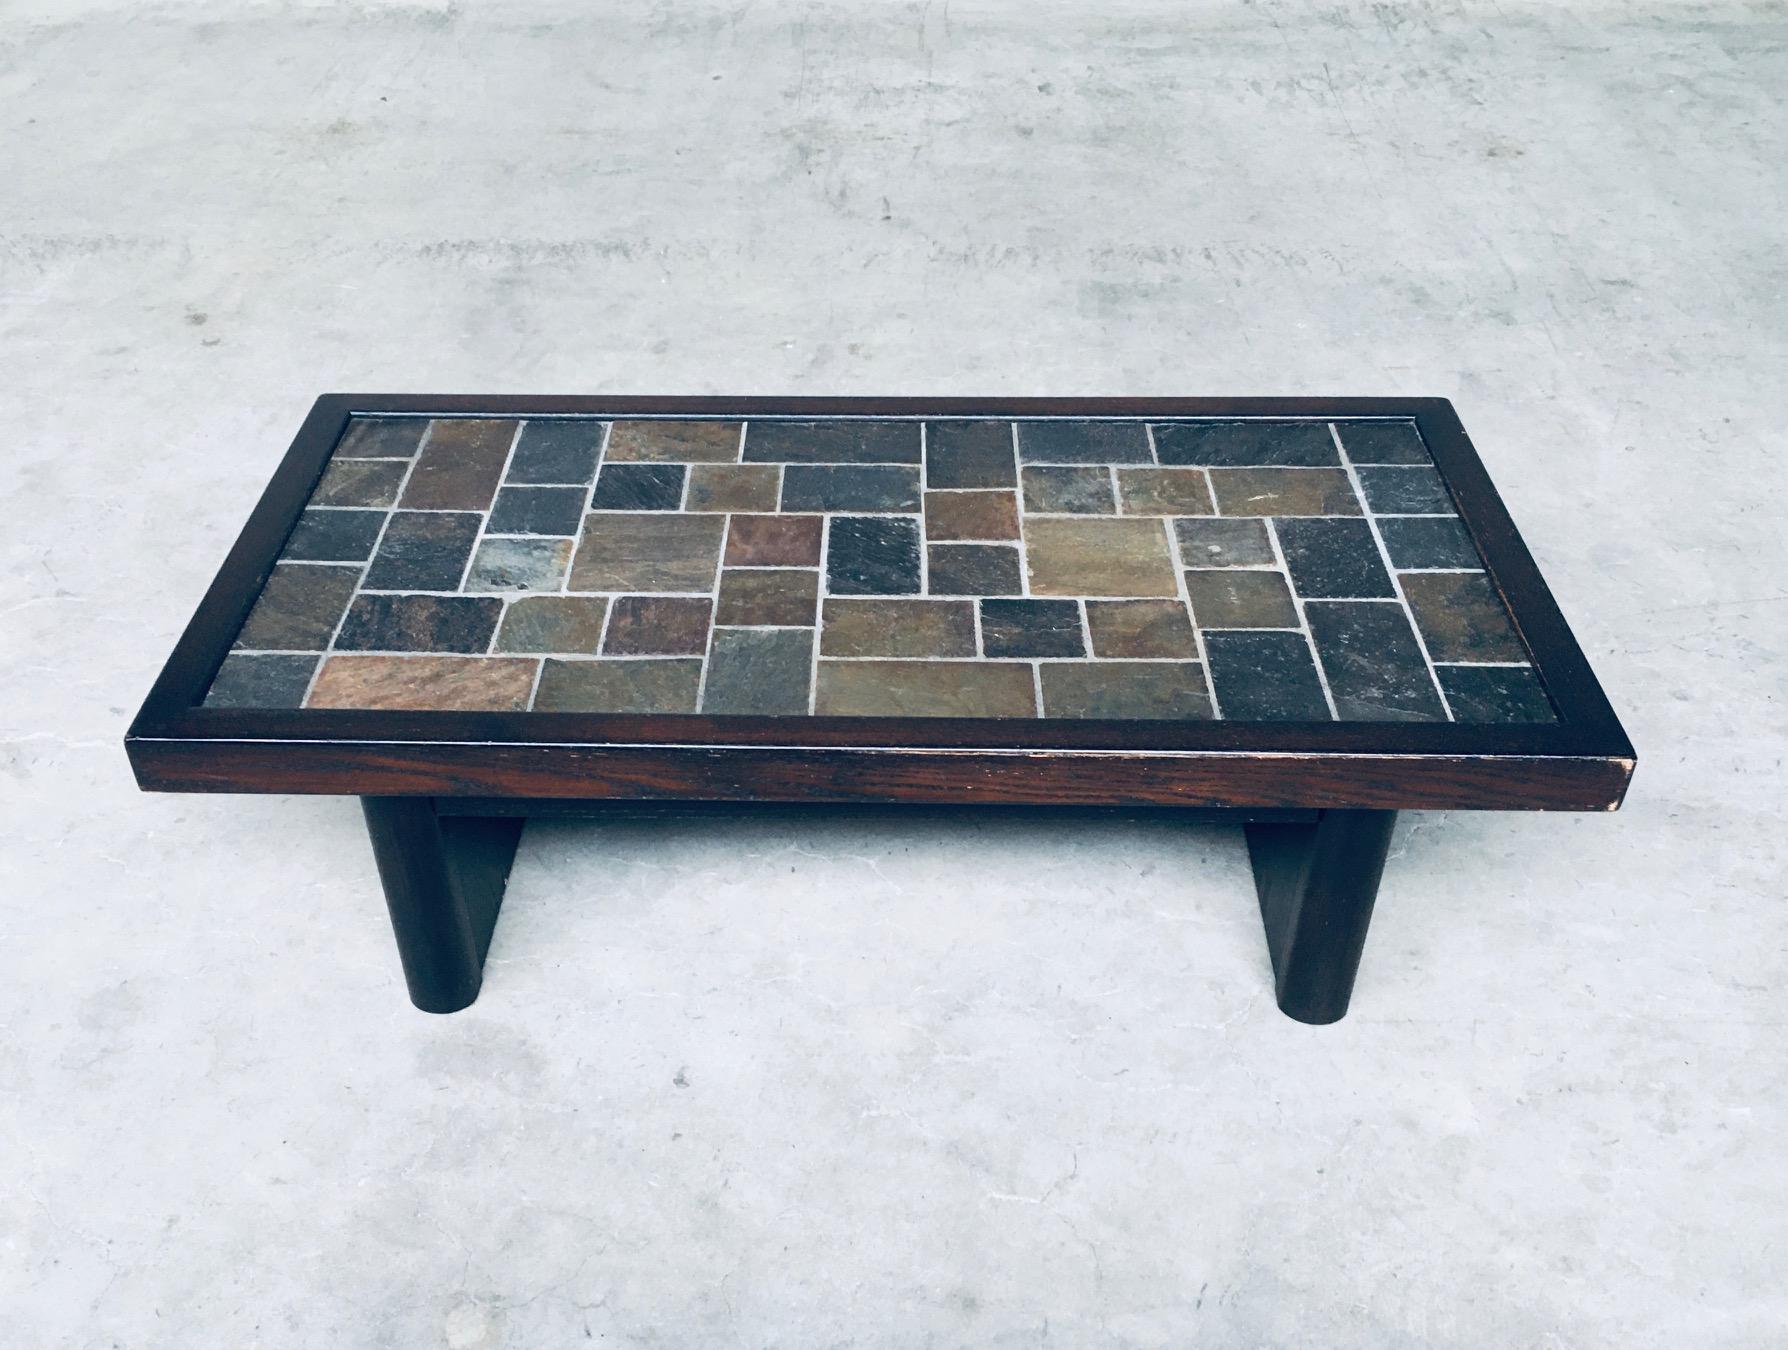 Belgian Brutalist Design in Style Slate Tile Inlay Coffee Table, Belgium 1970's For Sale